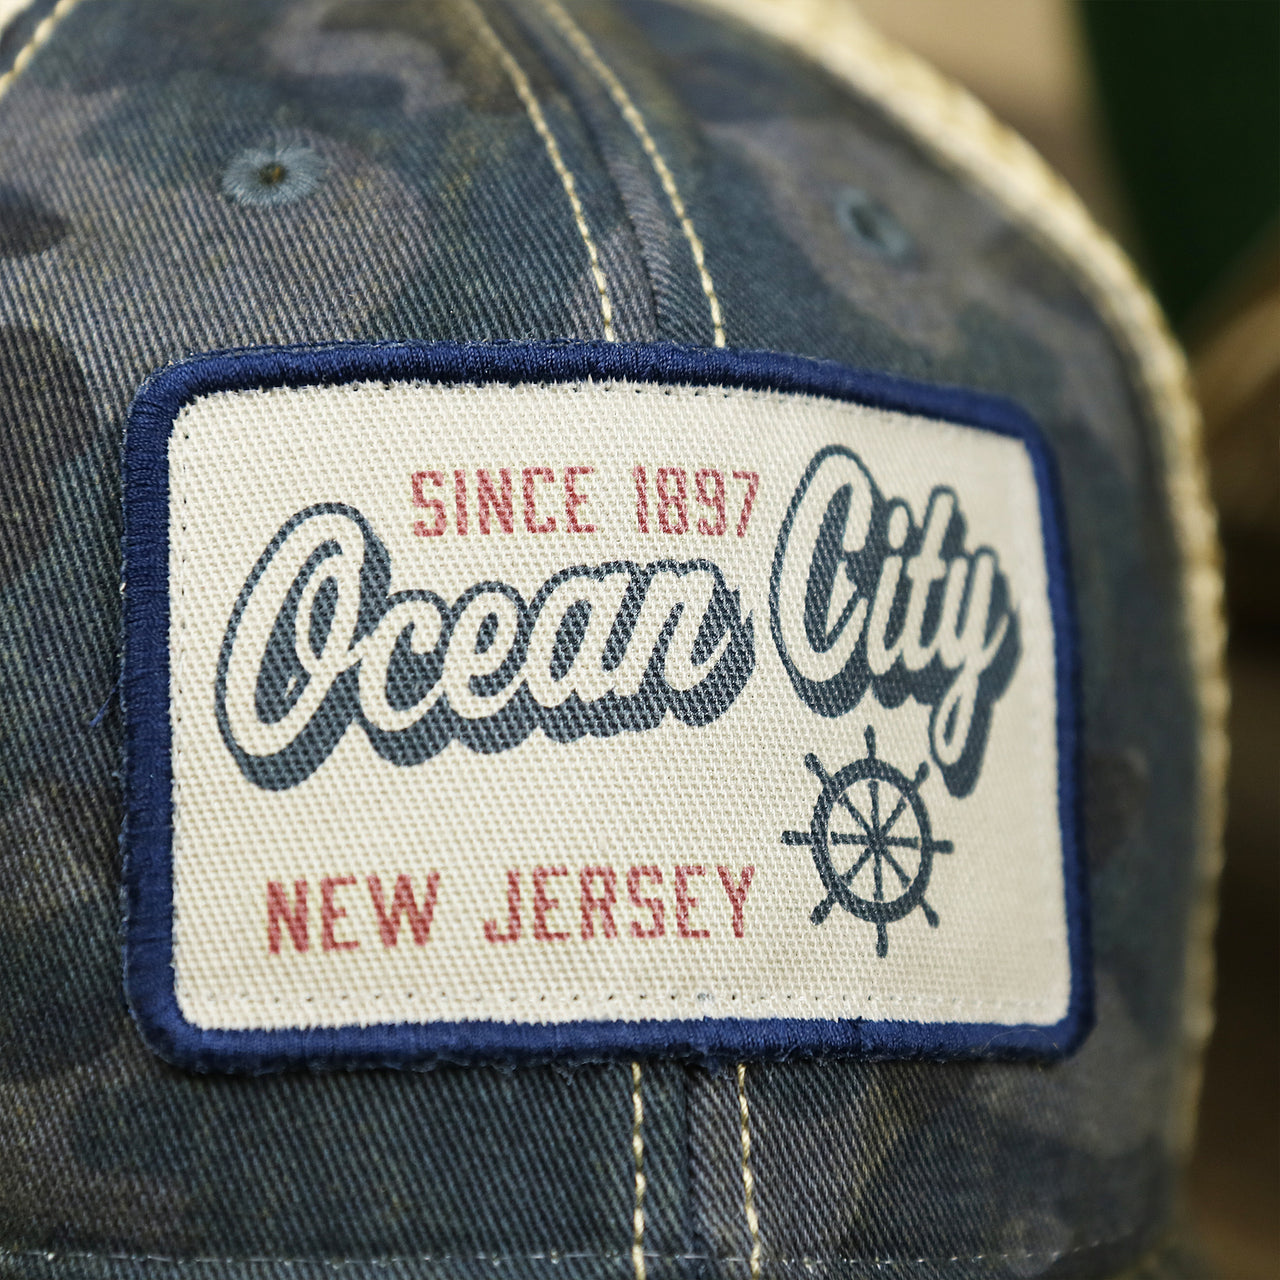 The Ocean City Patch on the Ocean City New Jersey Since 1897 Helm Patch Camo Print Mesh Back Trucker Hat | Camo Navy Blue Trucker Hat